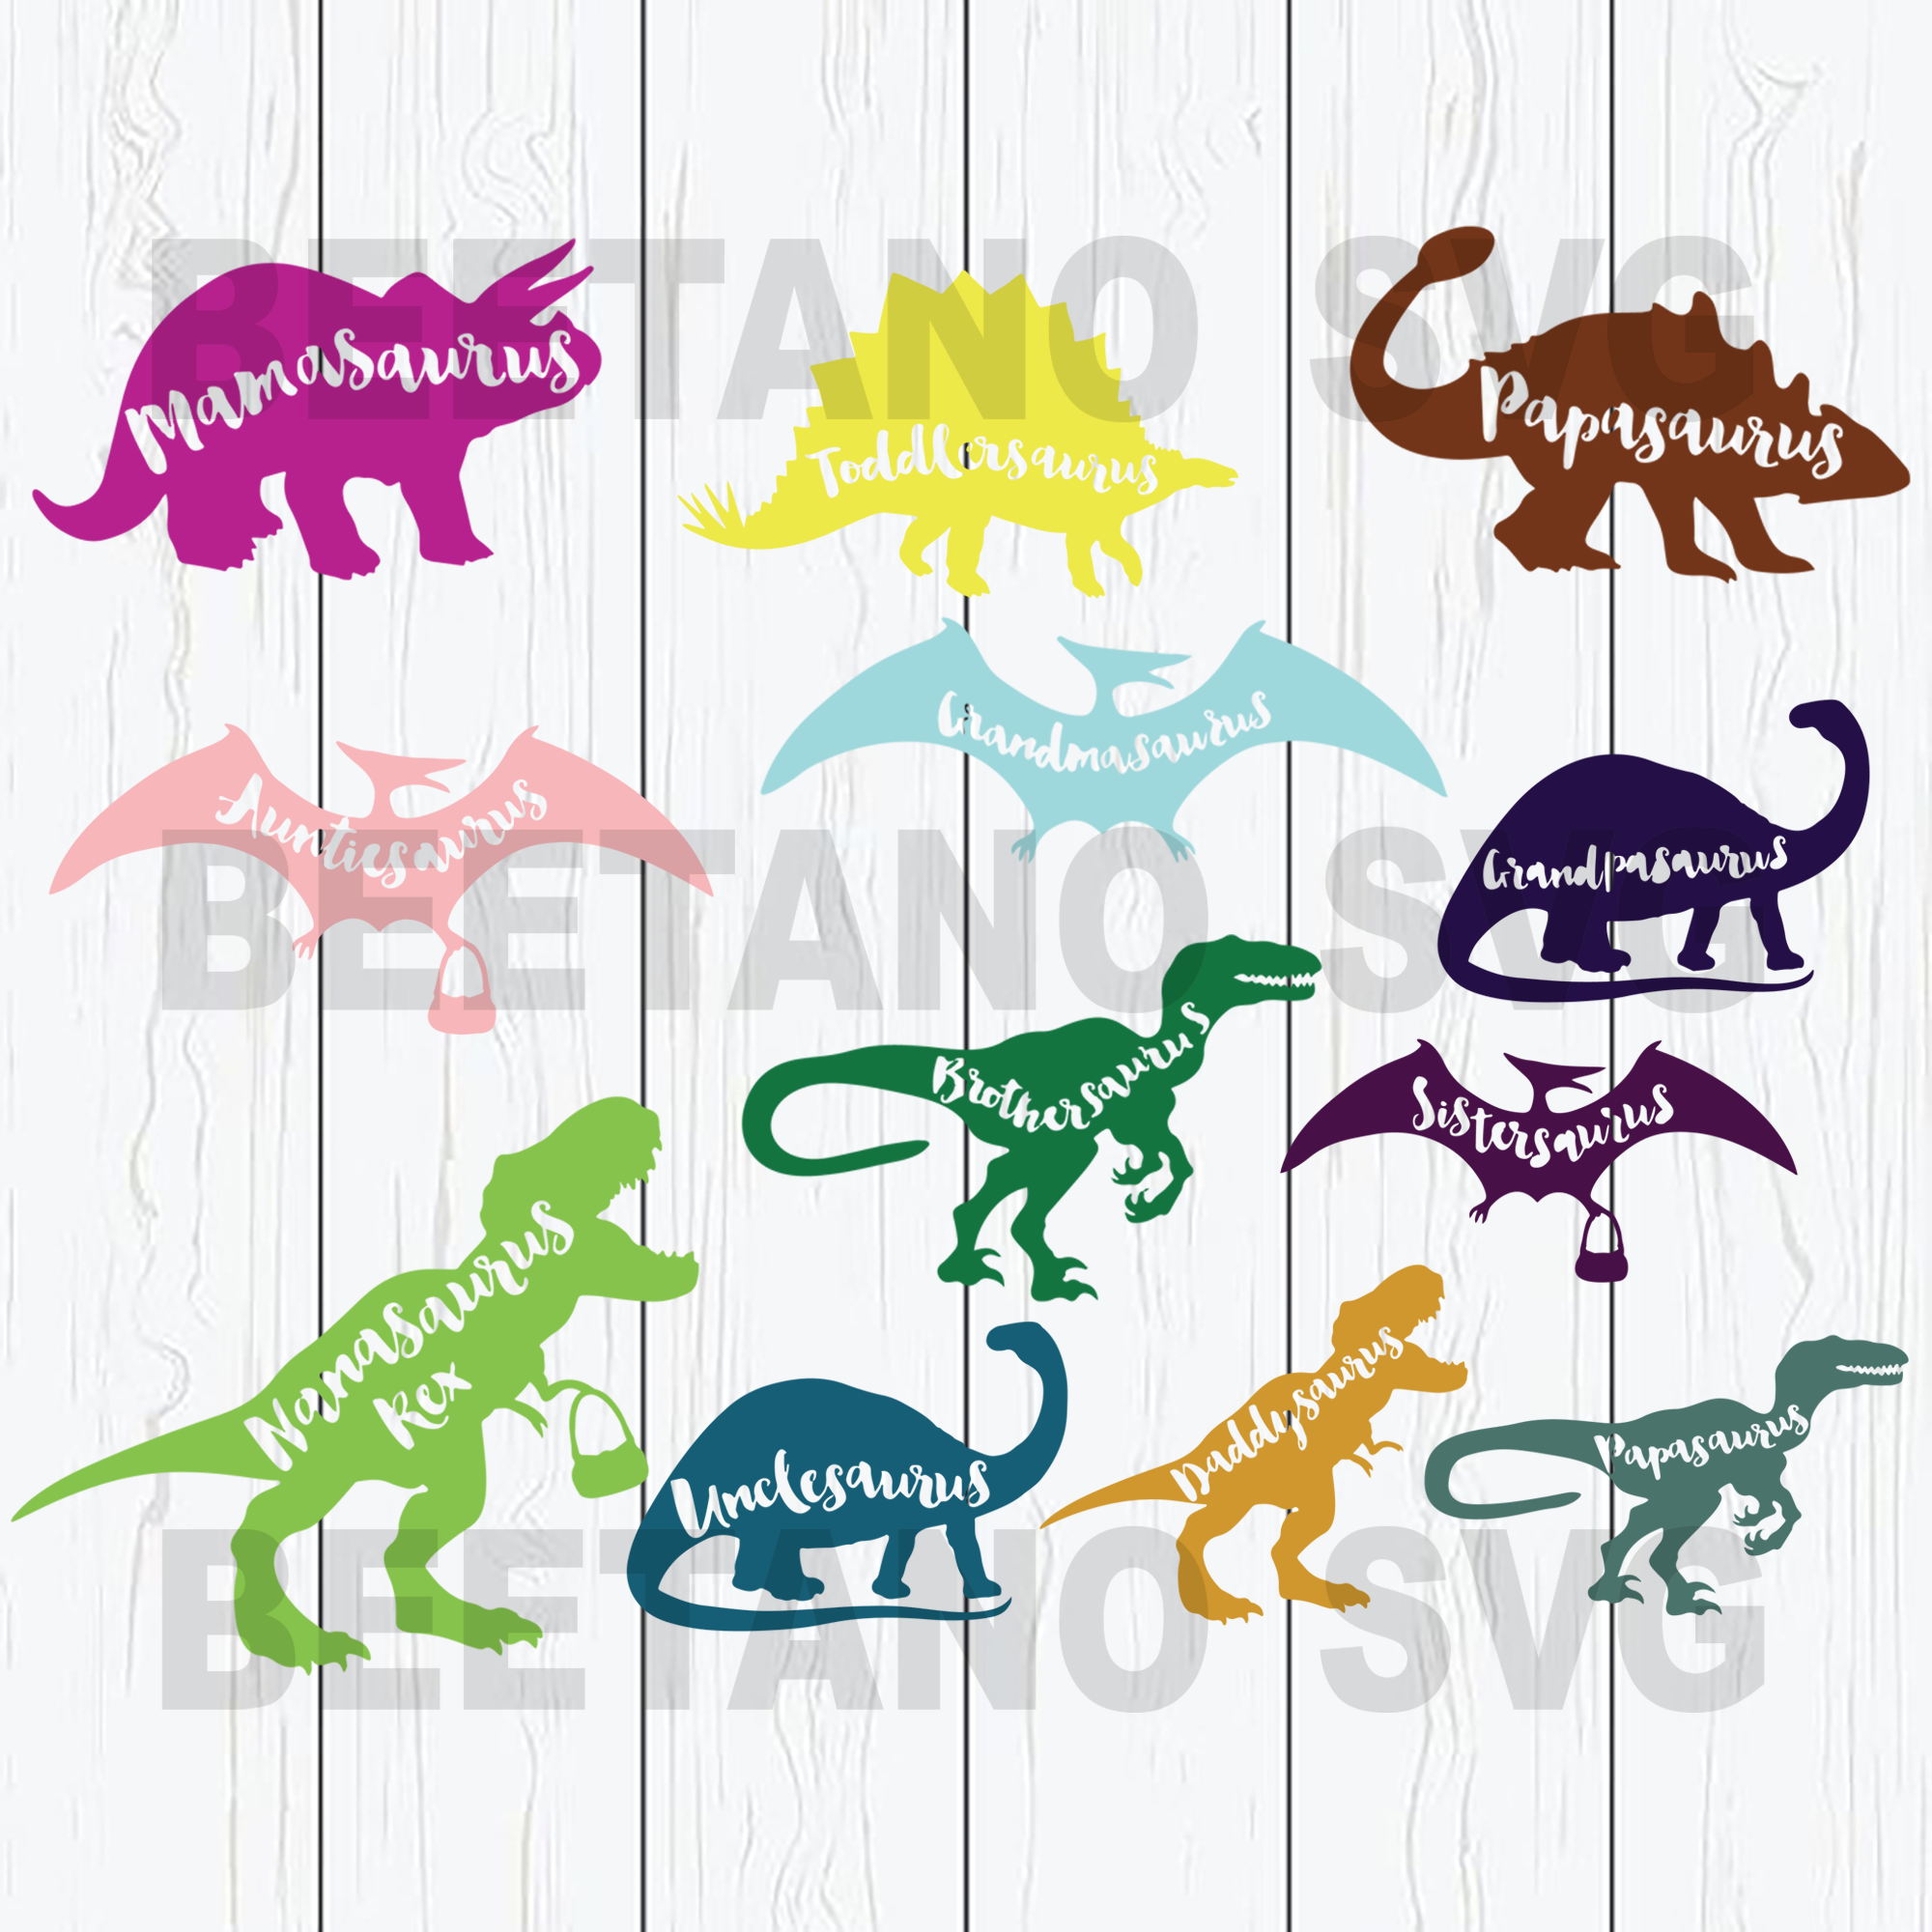 Download Mamasaurus Family Dinosaurs Bundle Cutting Files For Cricut Svg Dxf